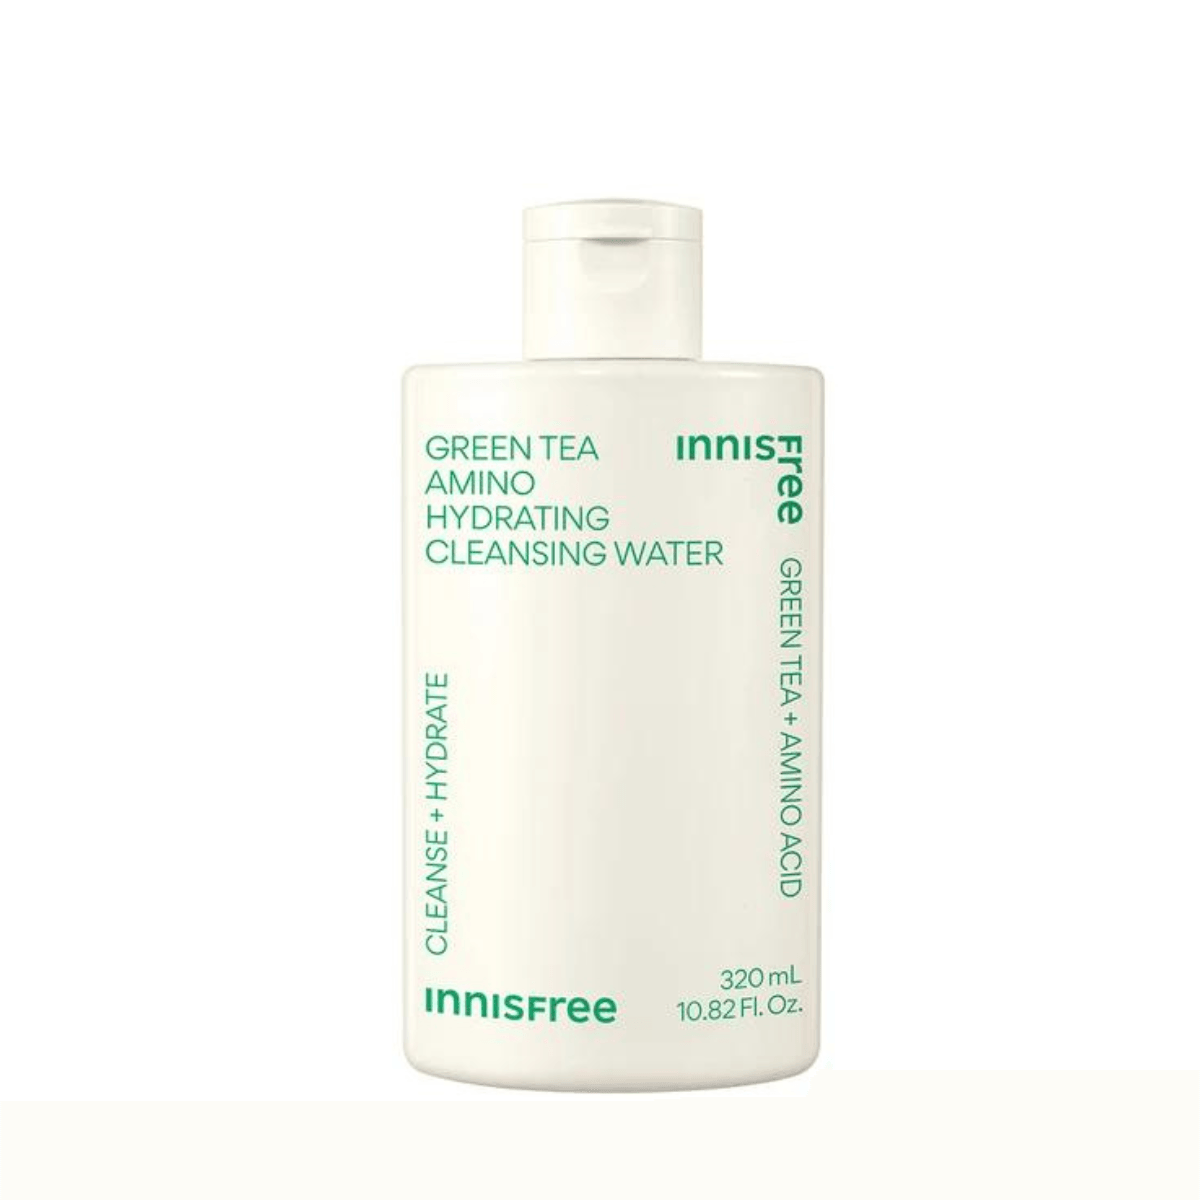 Green Tea Hydrating Amino Cleansing Water - 320 ml